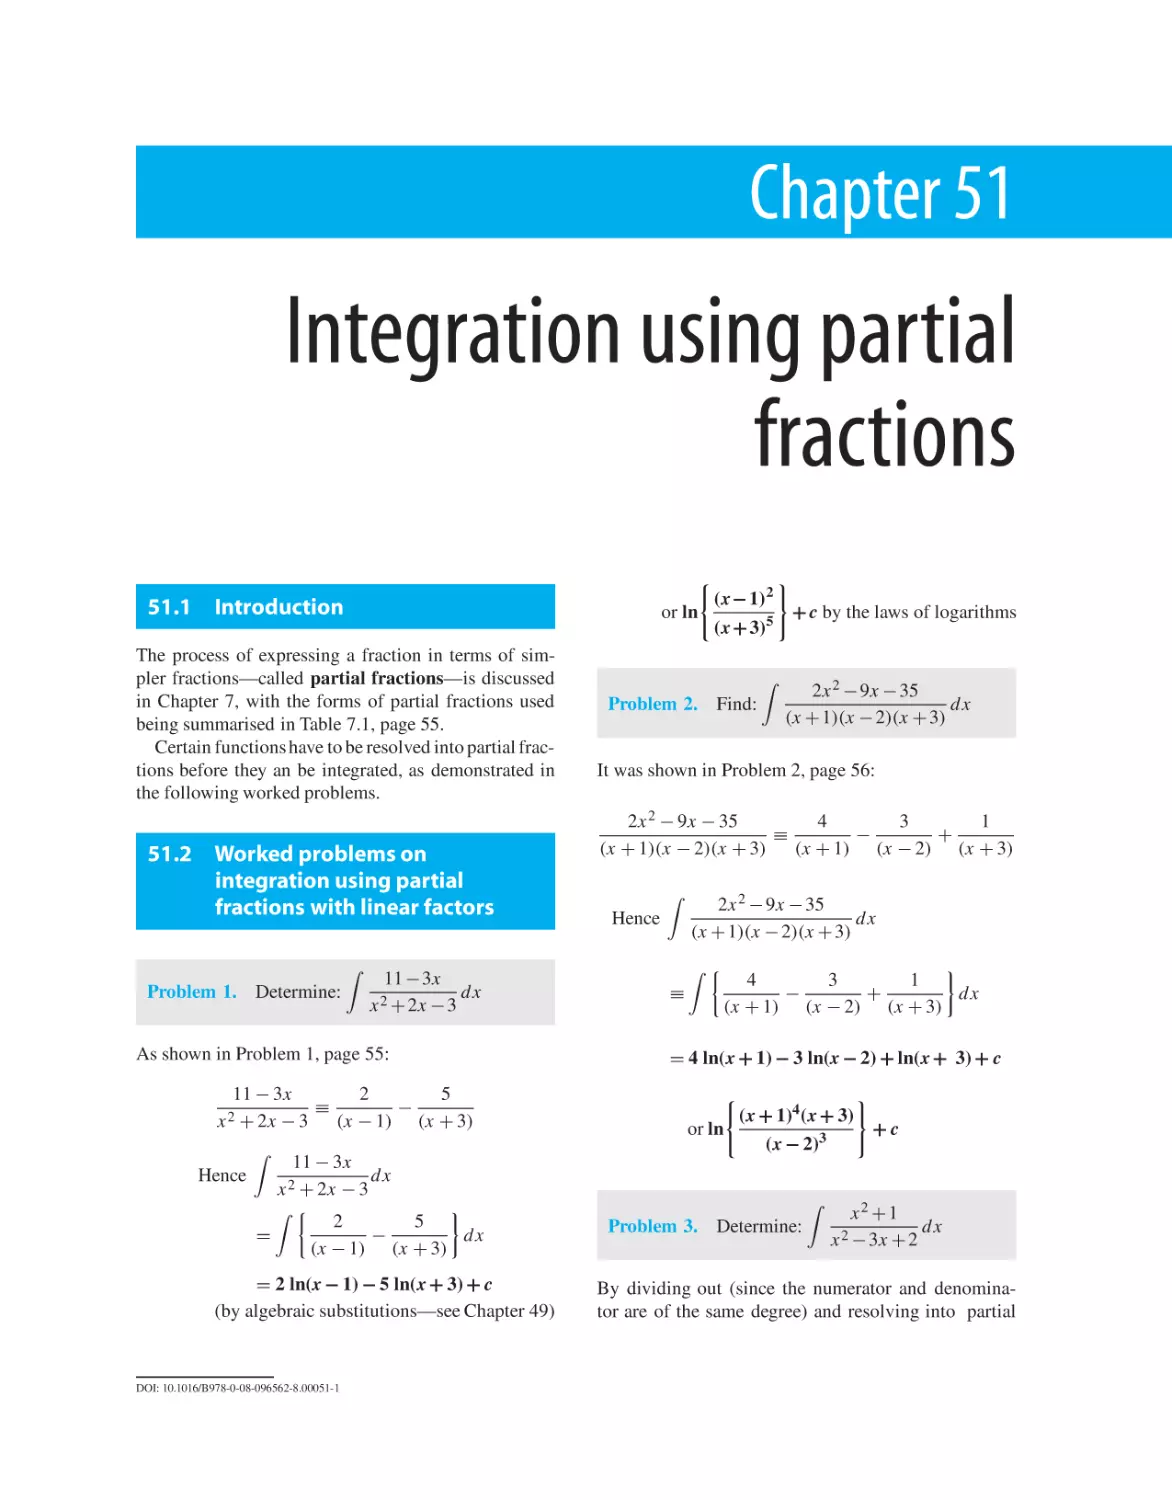 Chapter 51. Integration using partial fractions
51.1 Introduction
51.2 Worked problems on integration using partial fractions with linear factors